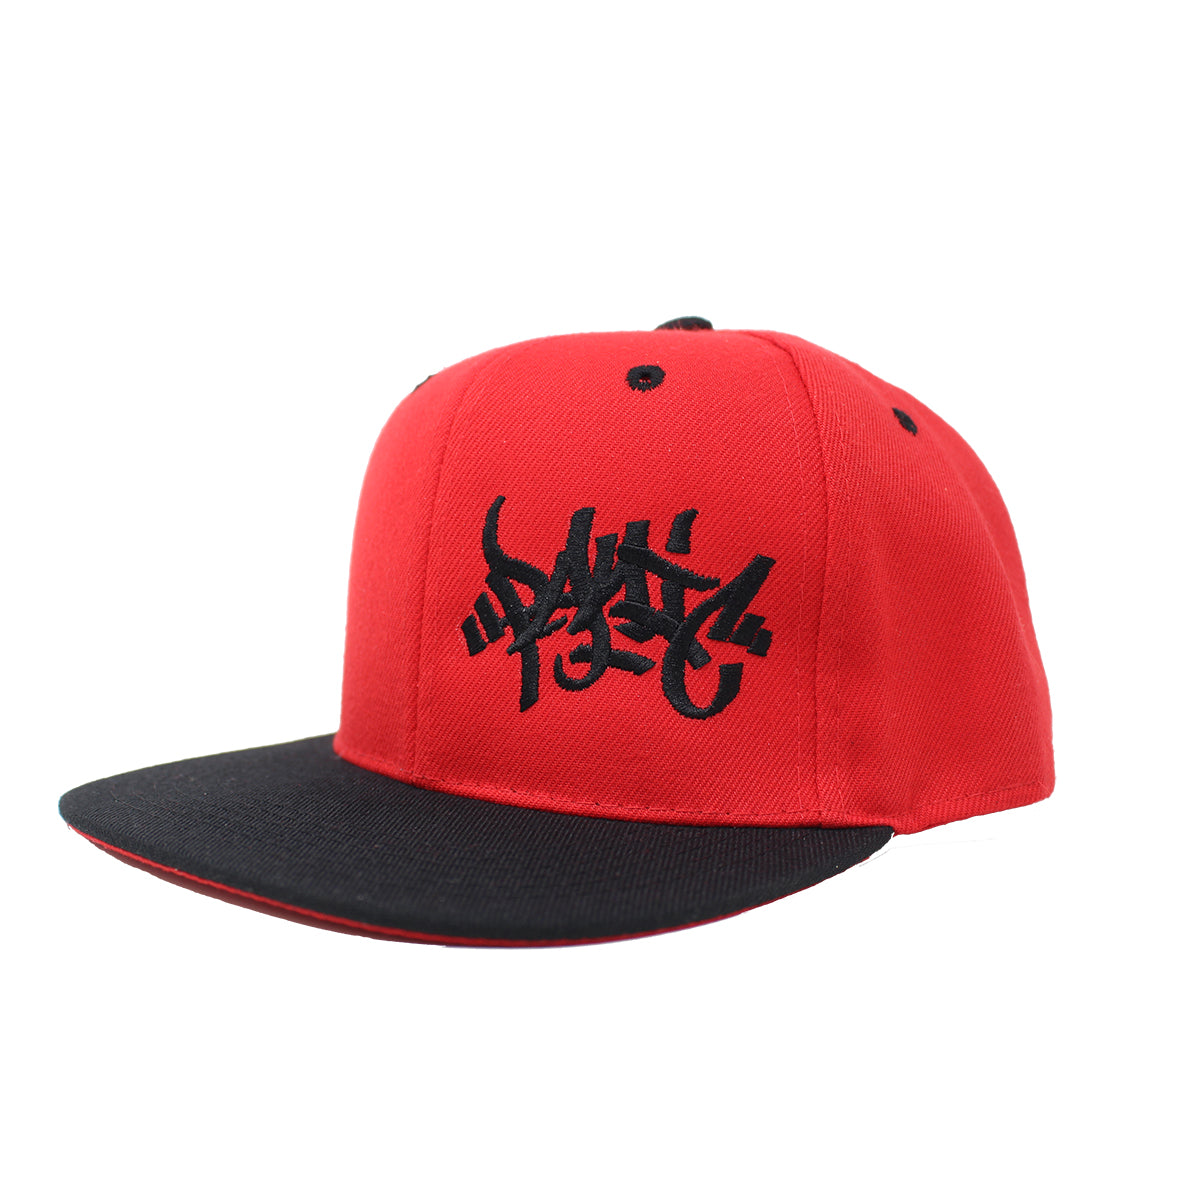 The Red/Black Tag Logo Snapback Hat - concreteaddicts